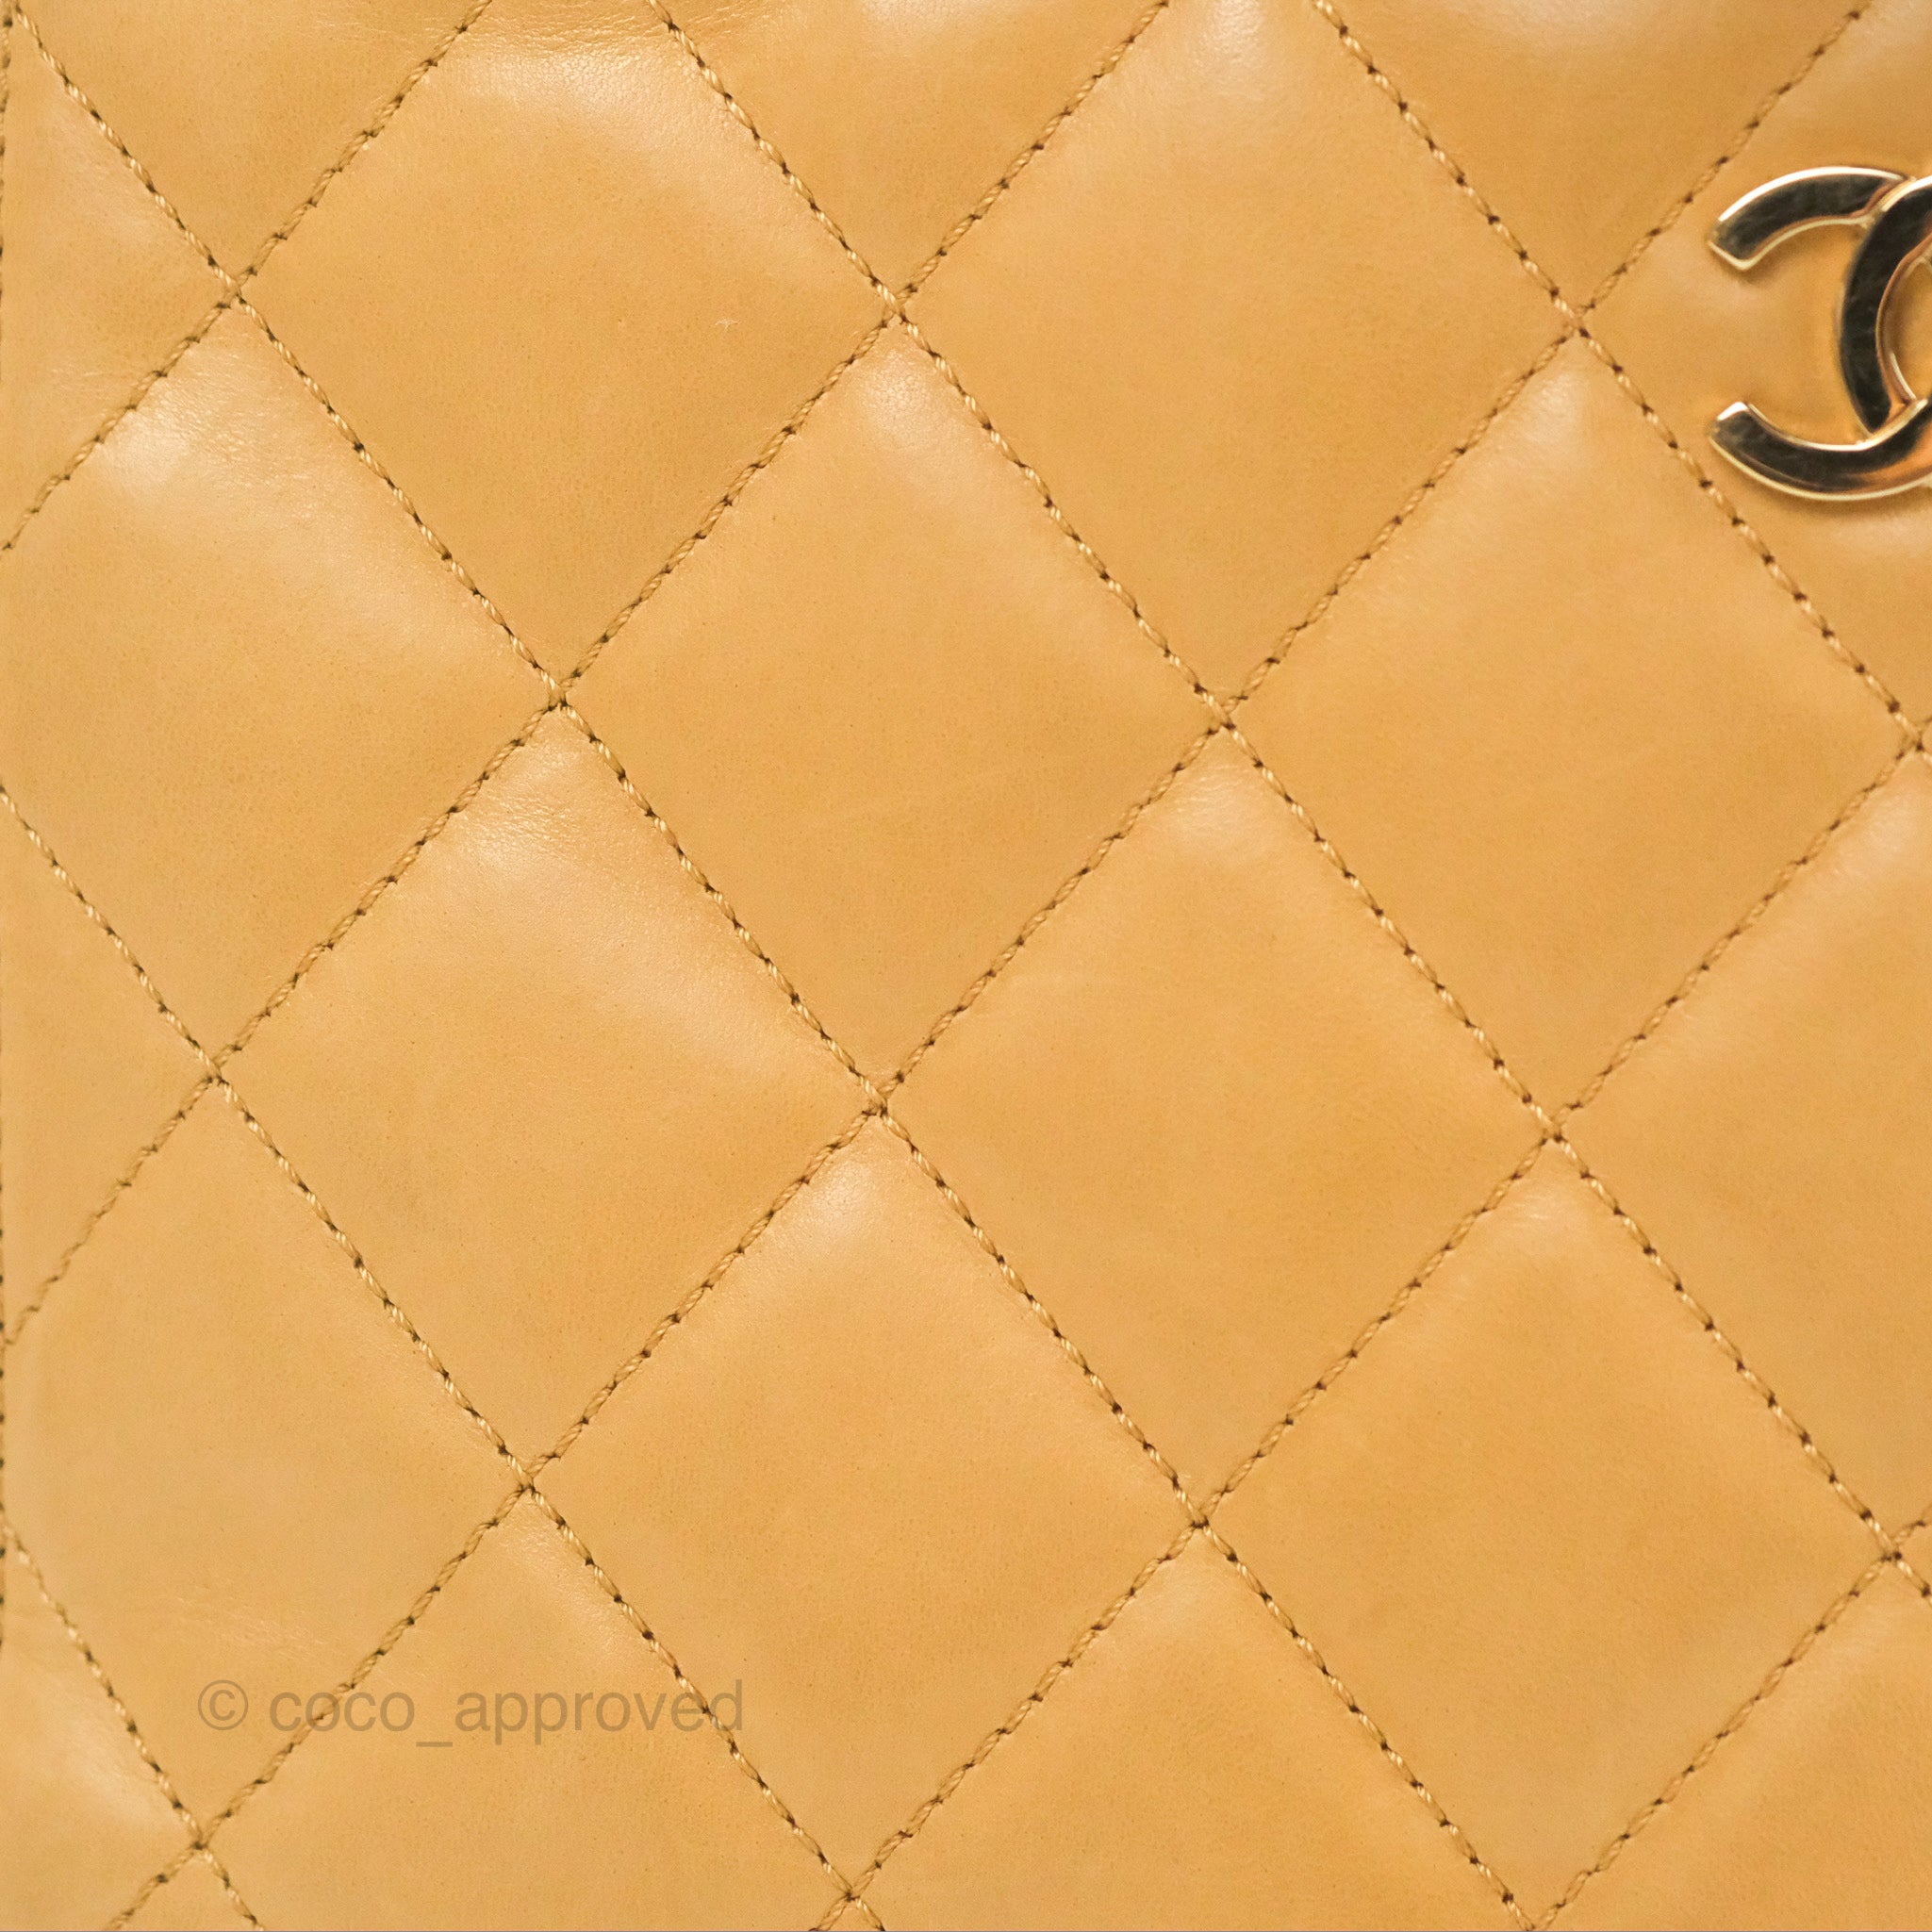 Chanel Vintage Small Top Handle Tote Quilted Beige Lambskin – Coco